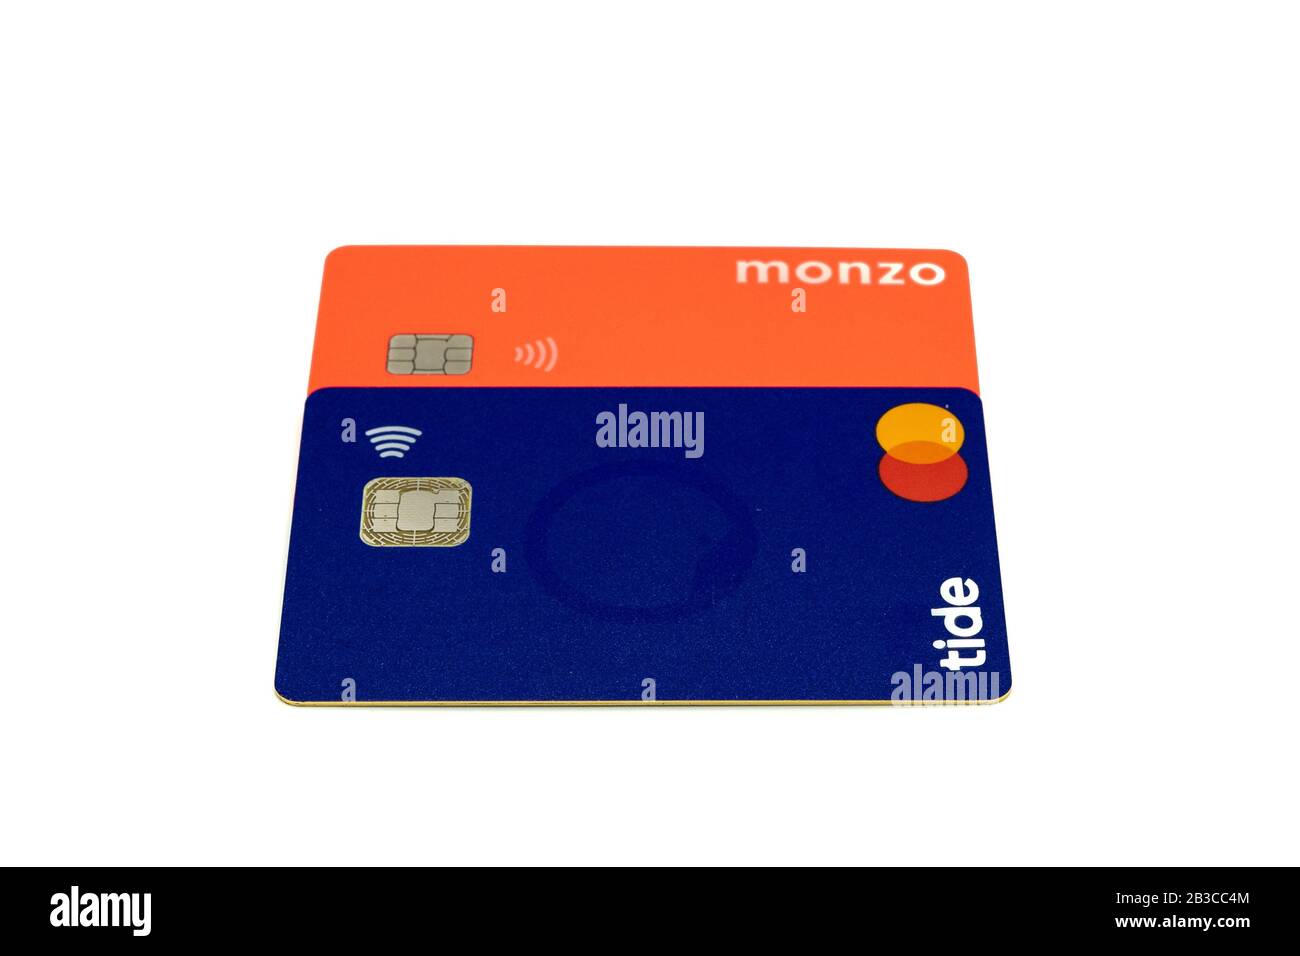 Two debit cards from online banks on for Tide bank and one for Monzo bank Stock Photo